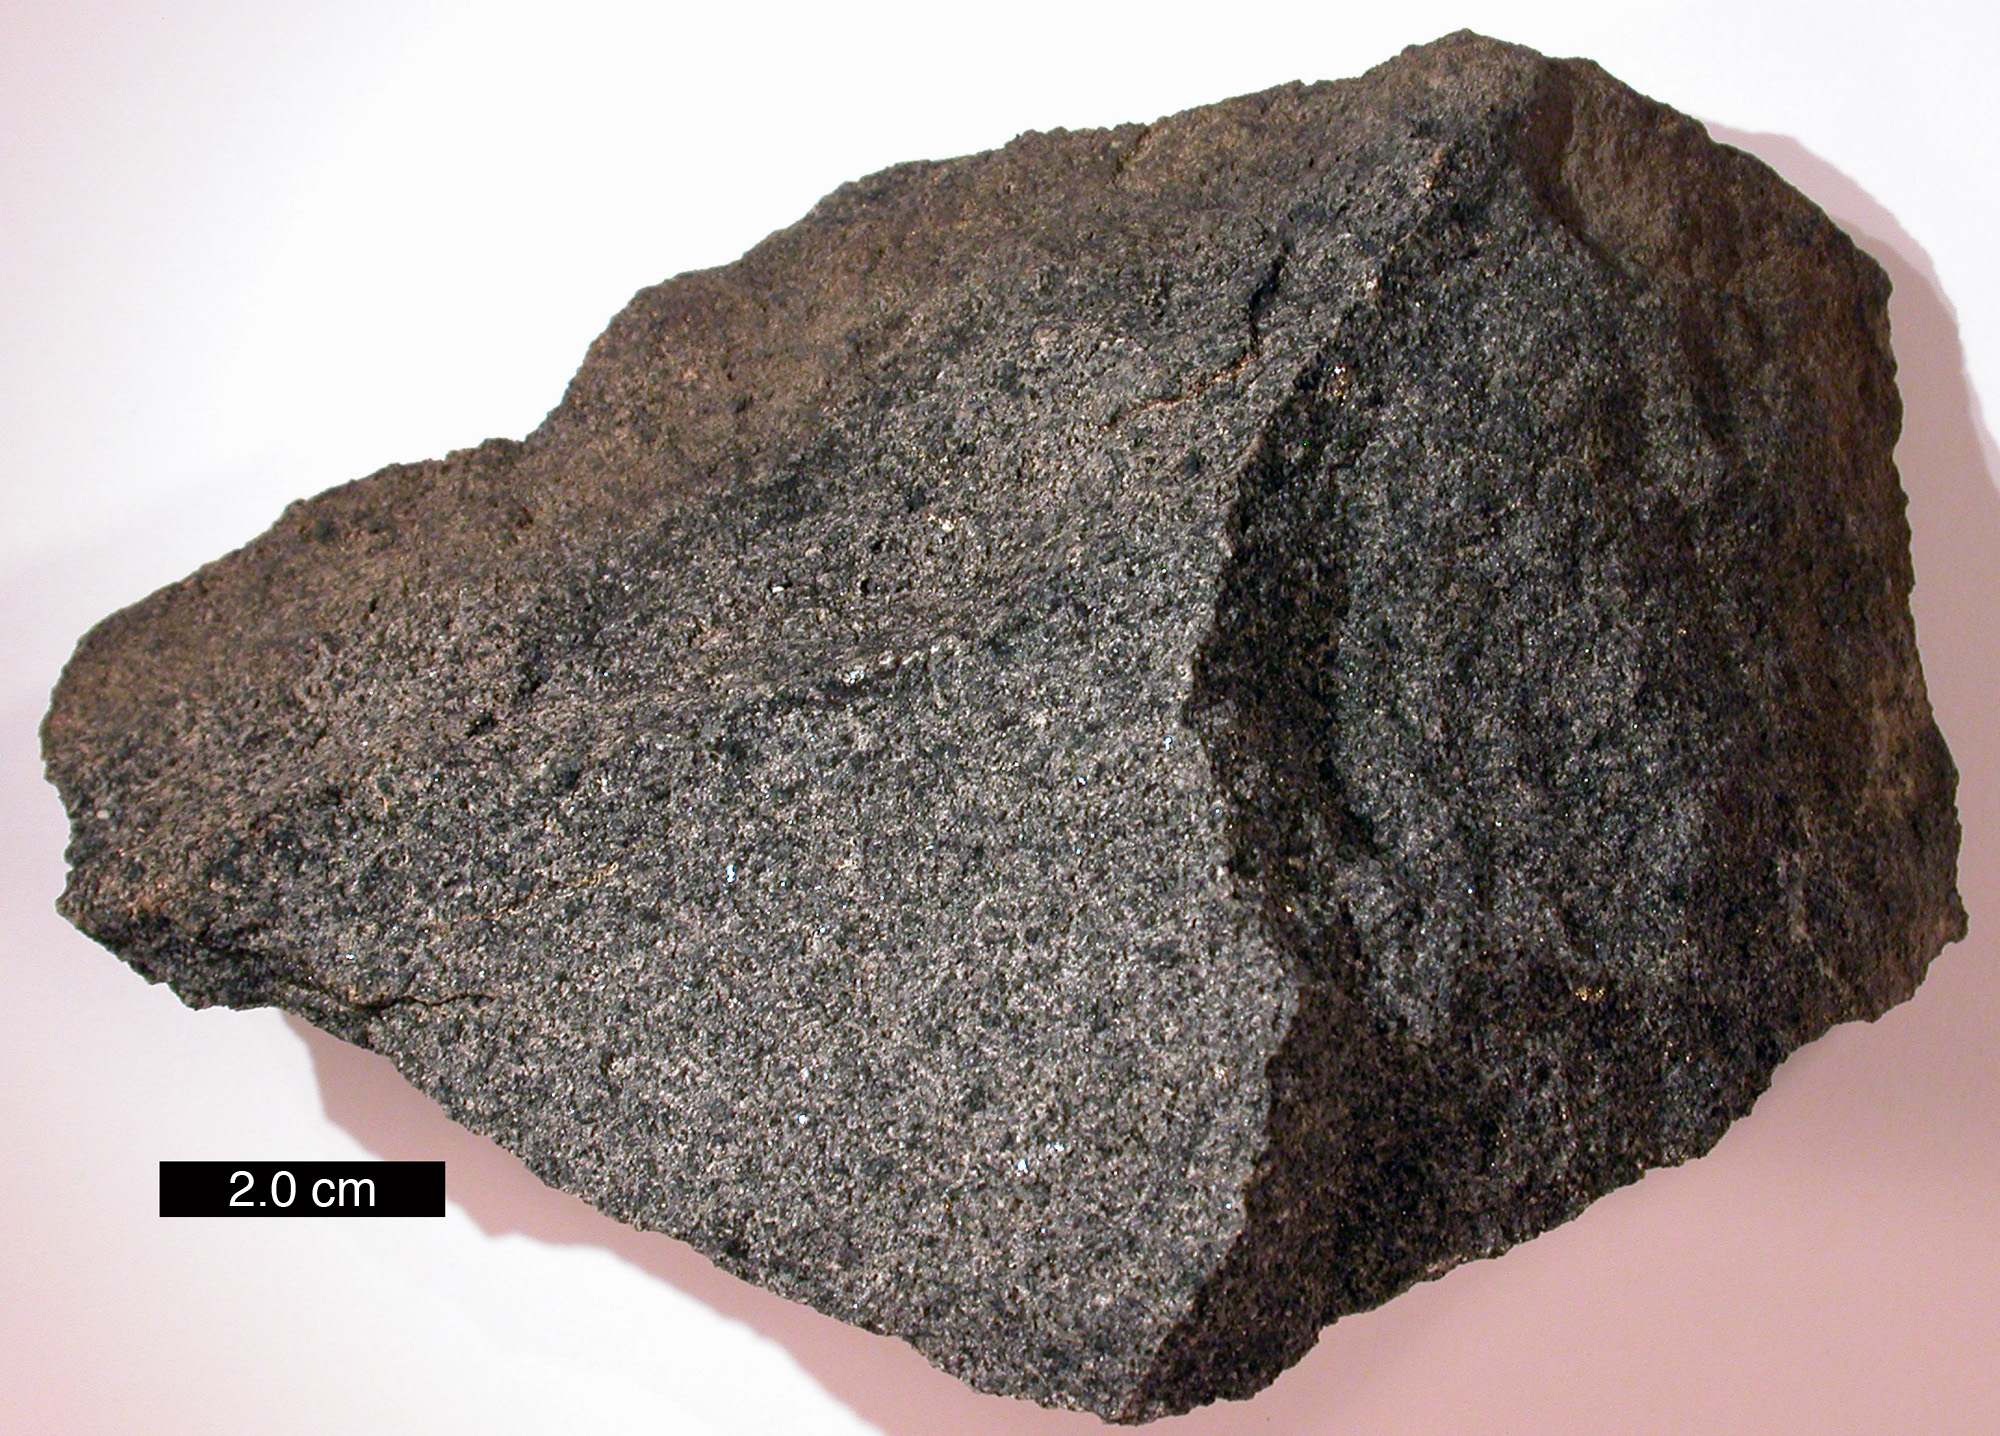 Solid, opaque, roughly triangular, fine-grained rock made of small brown and black particles